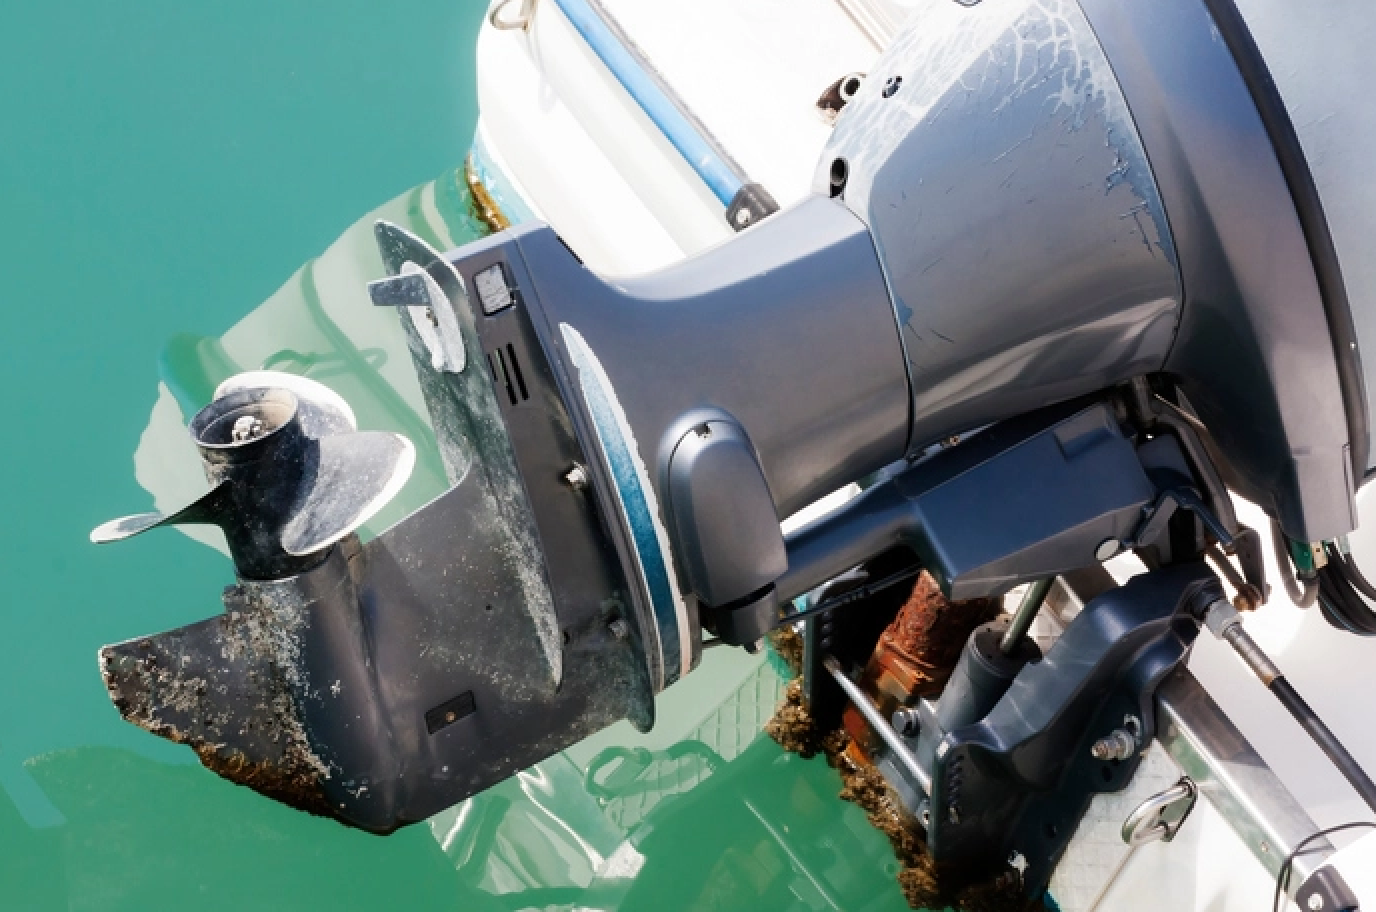 corroded outboard, corroded skeg, corrosion on outboard